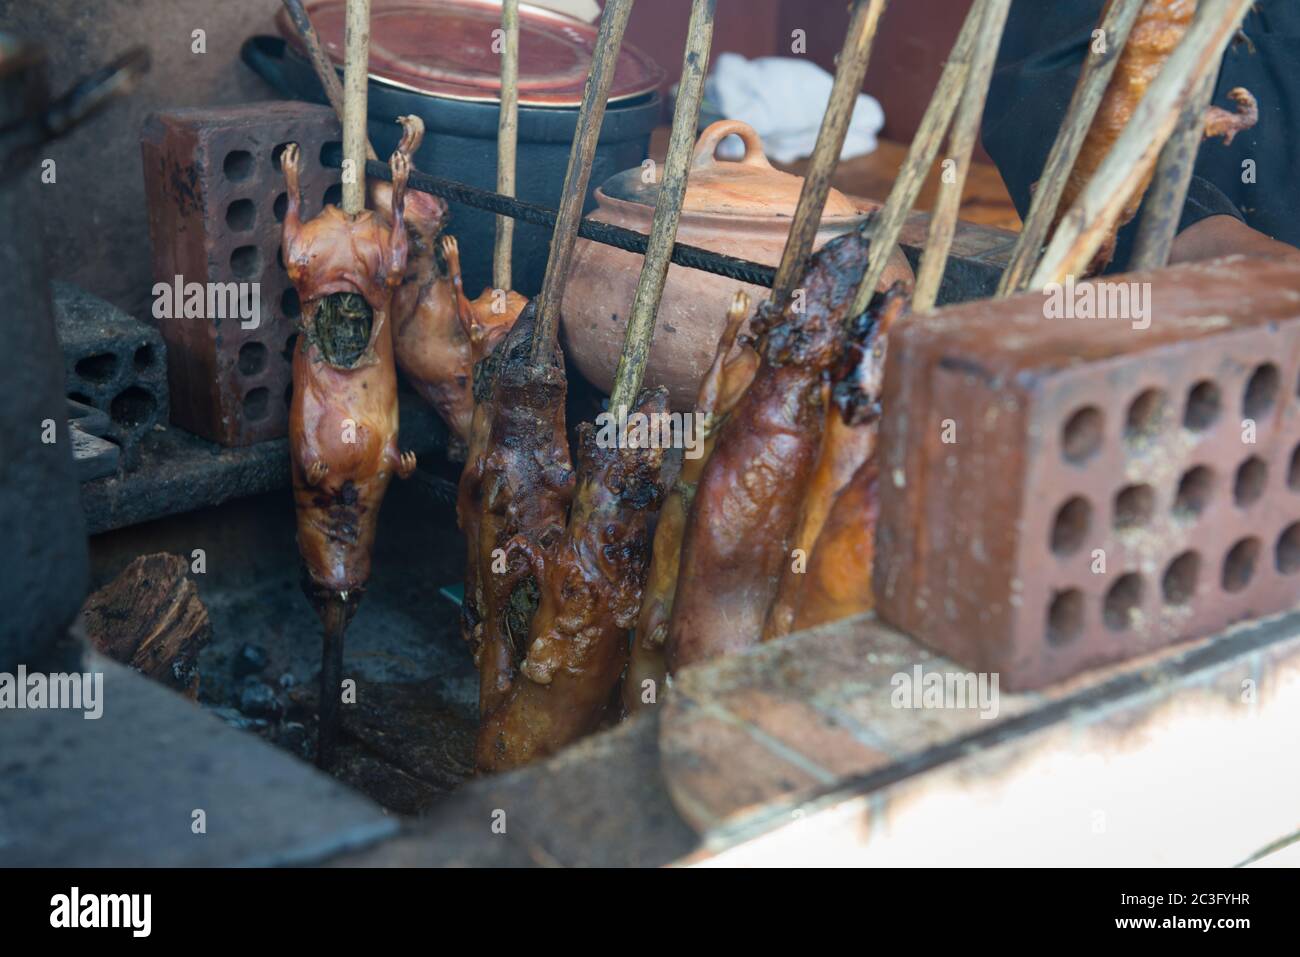 Guinea Pig roasted - traditional Meal in Peru. South America Stock Photo